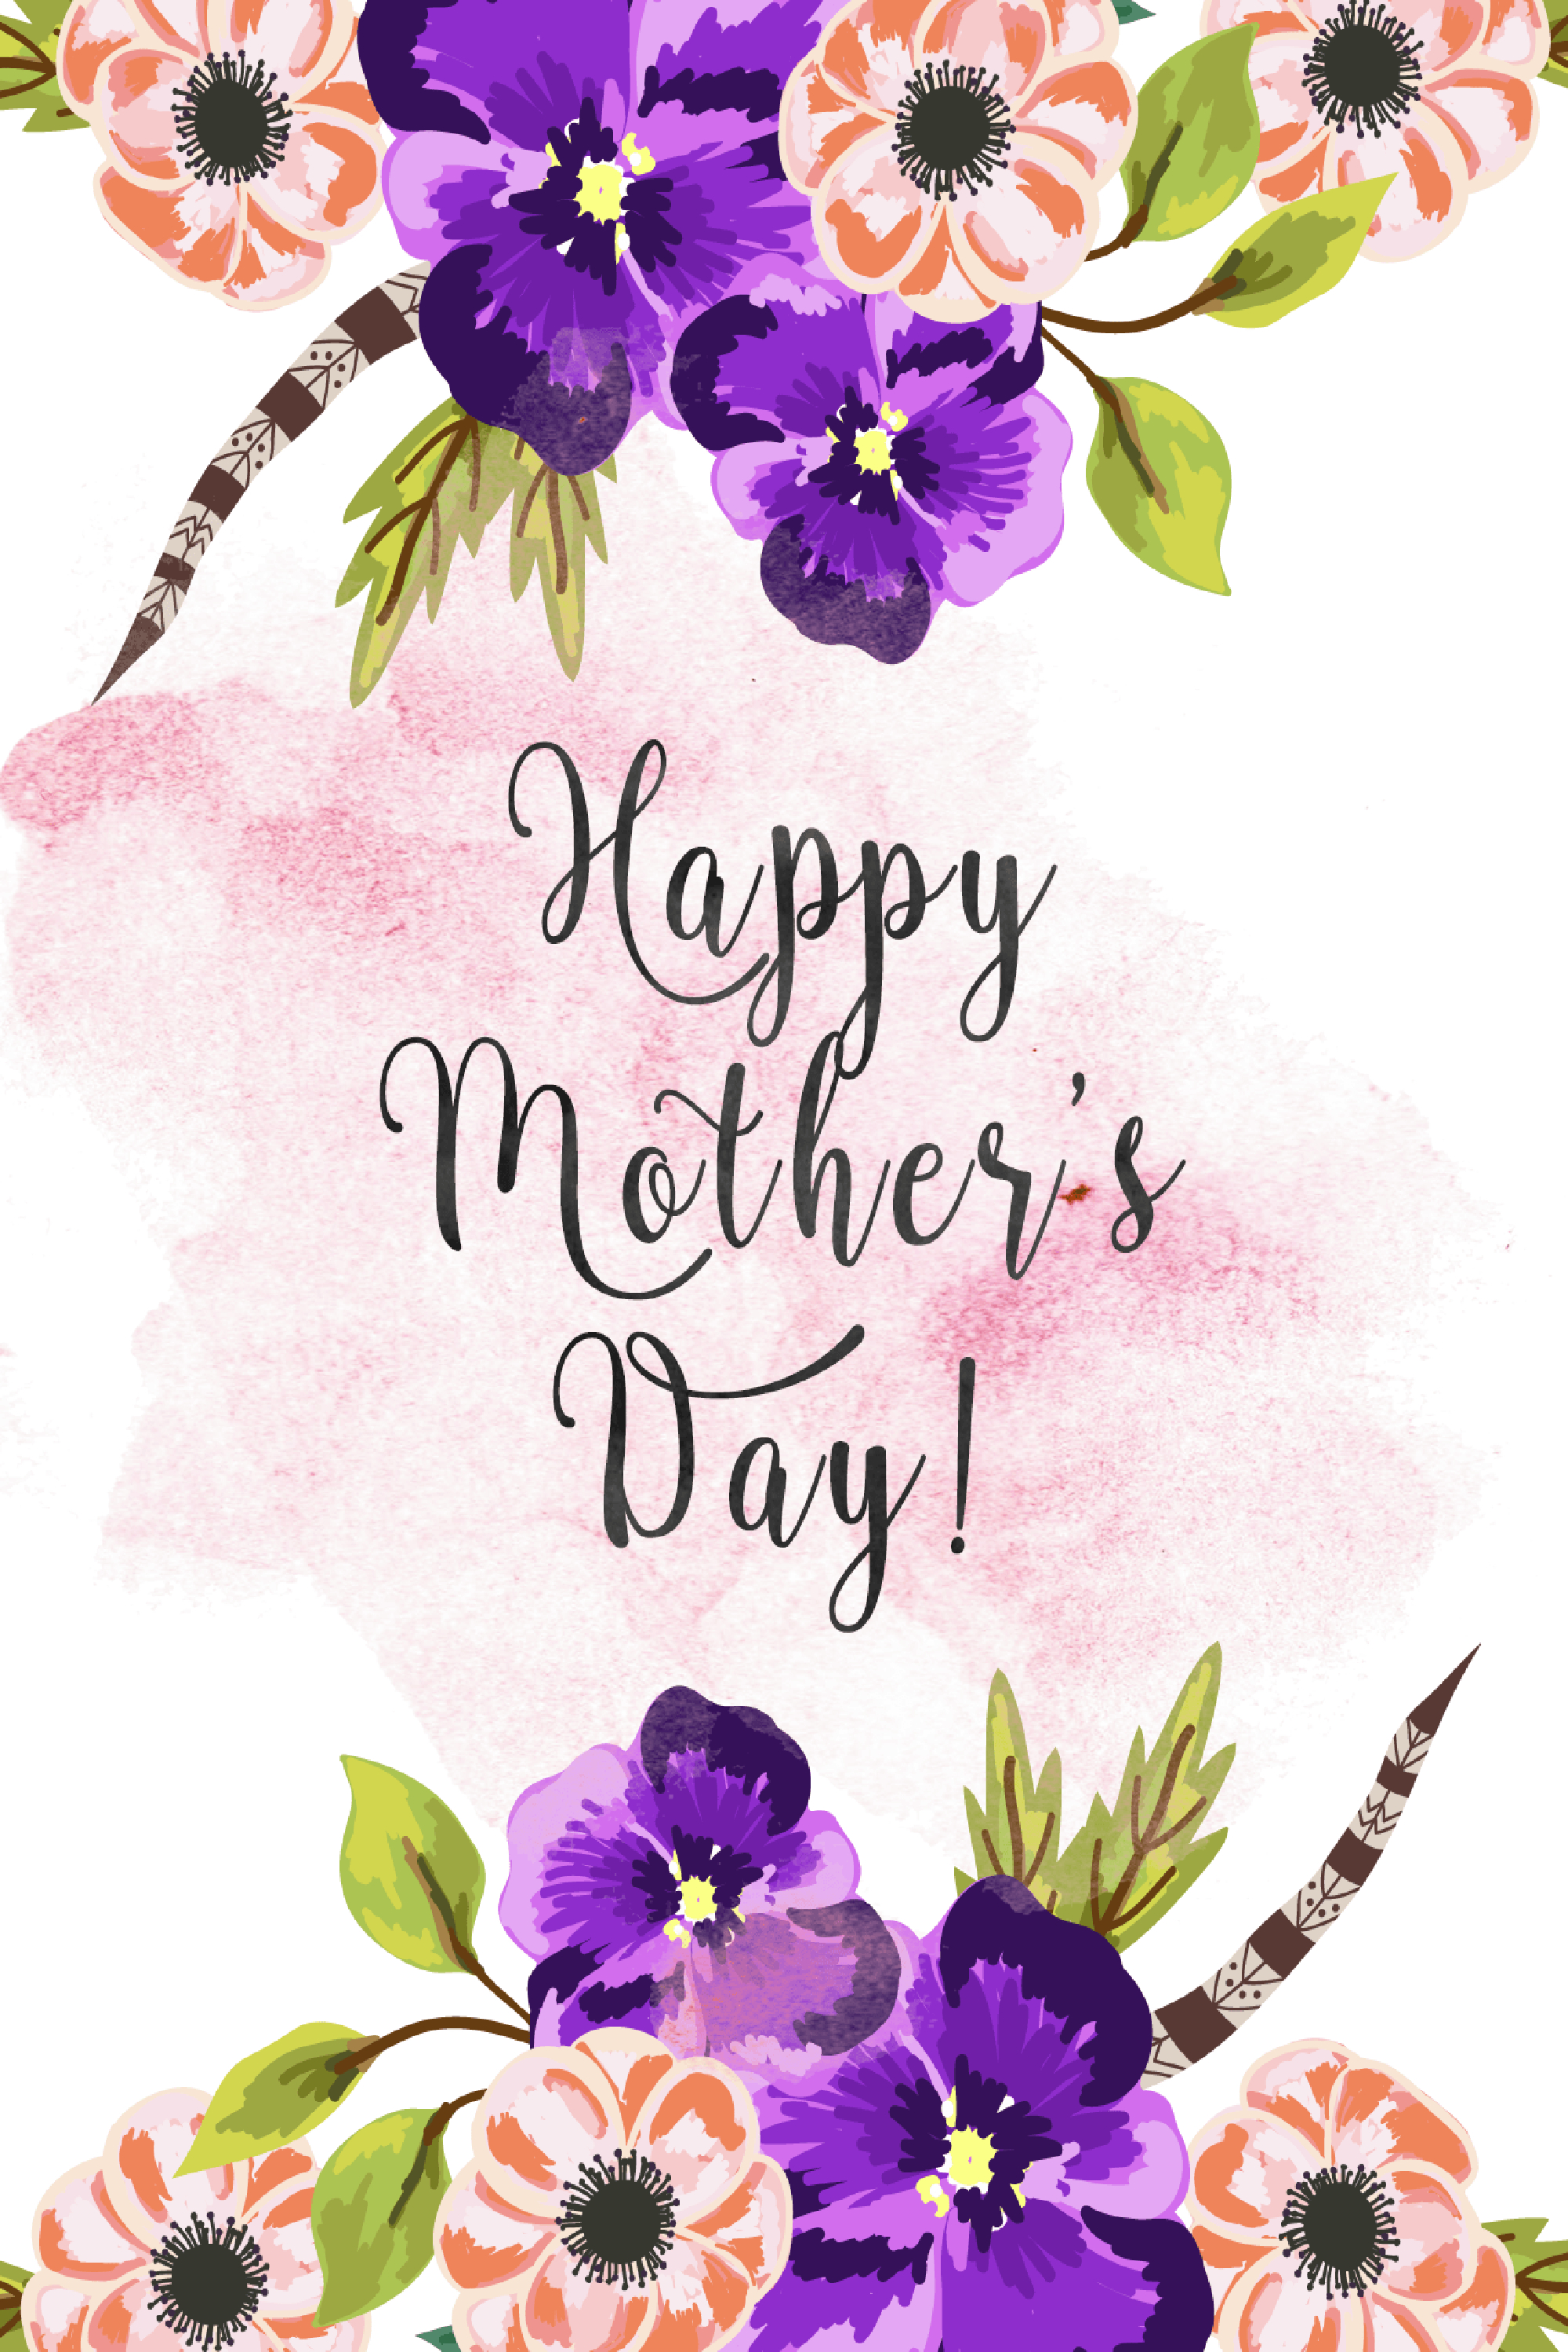 30 Cute Free Printable Mothers Day Cards - Mom Cards You Can Print - Free Printable Mothers Day Cards